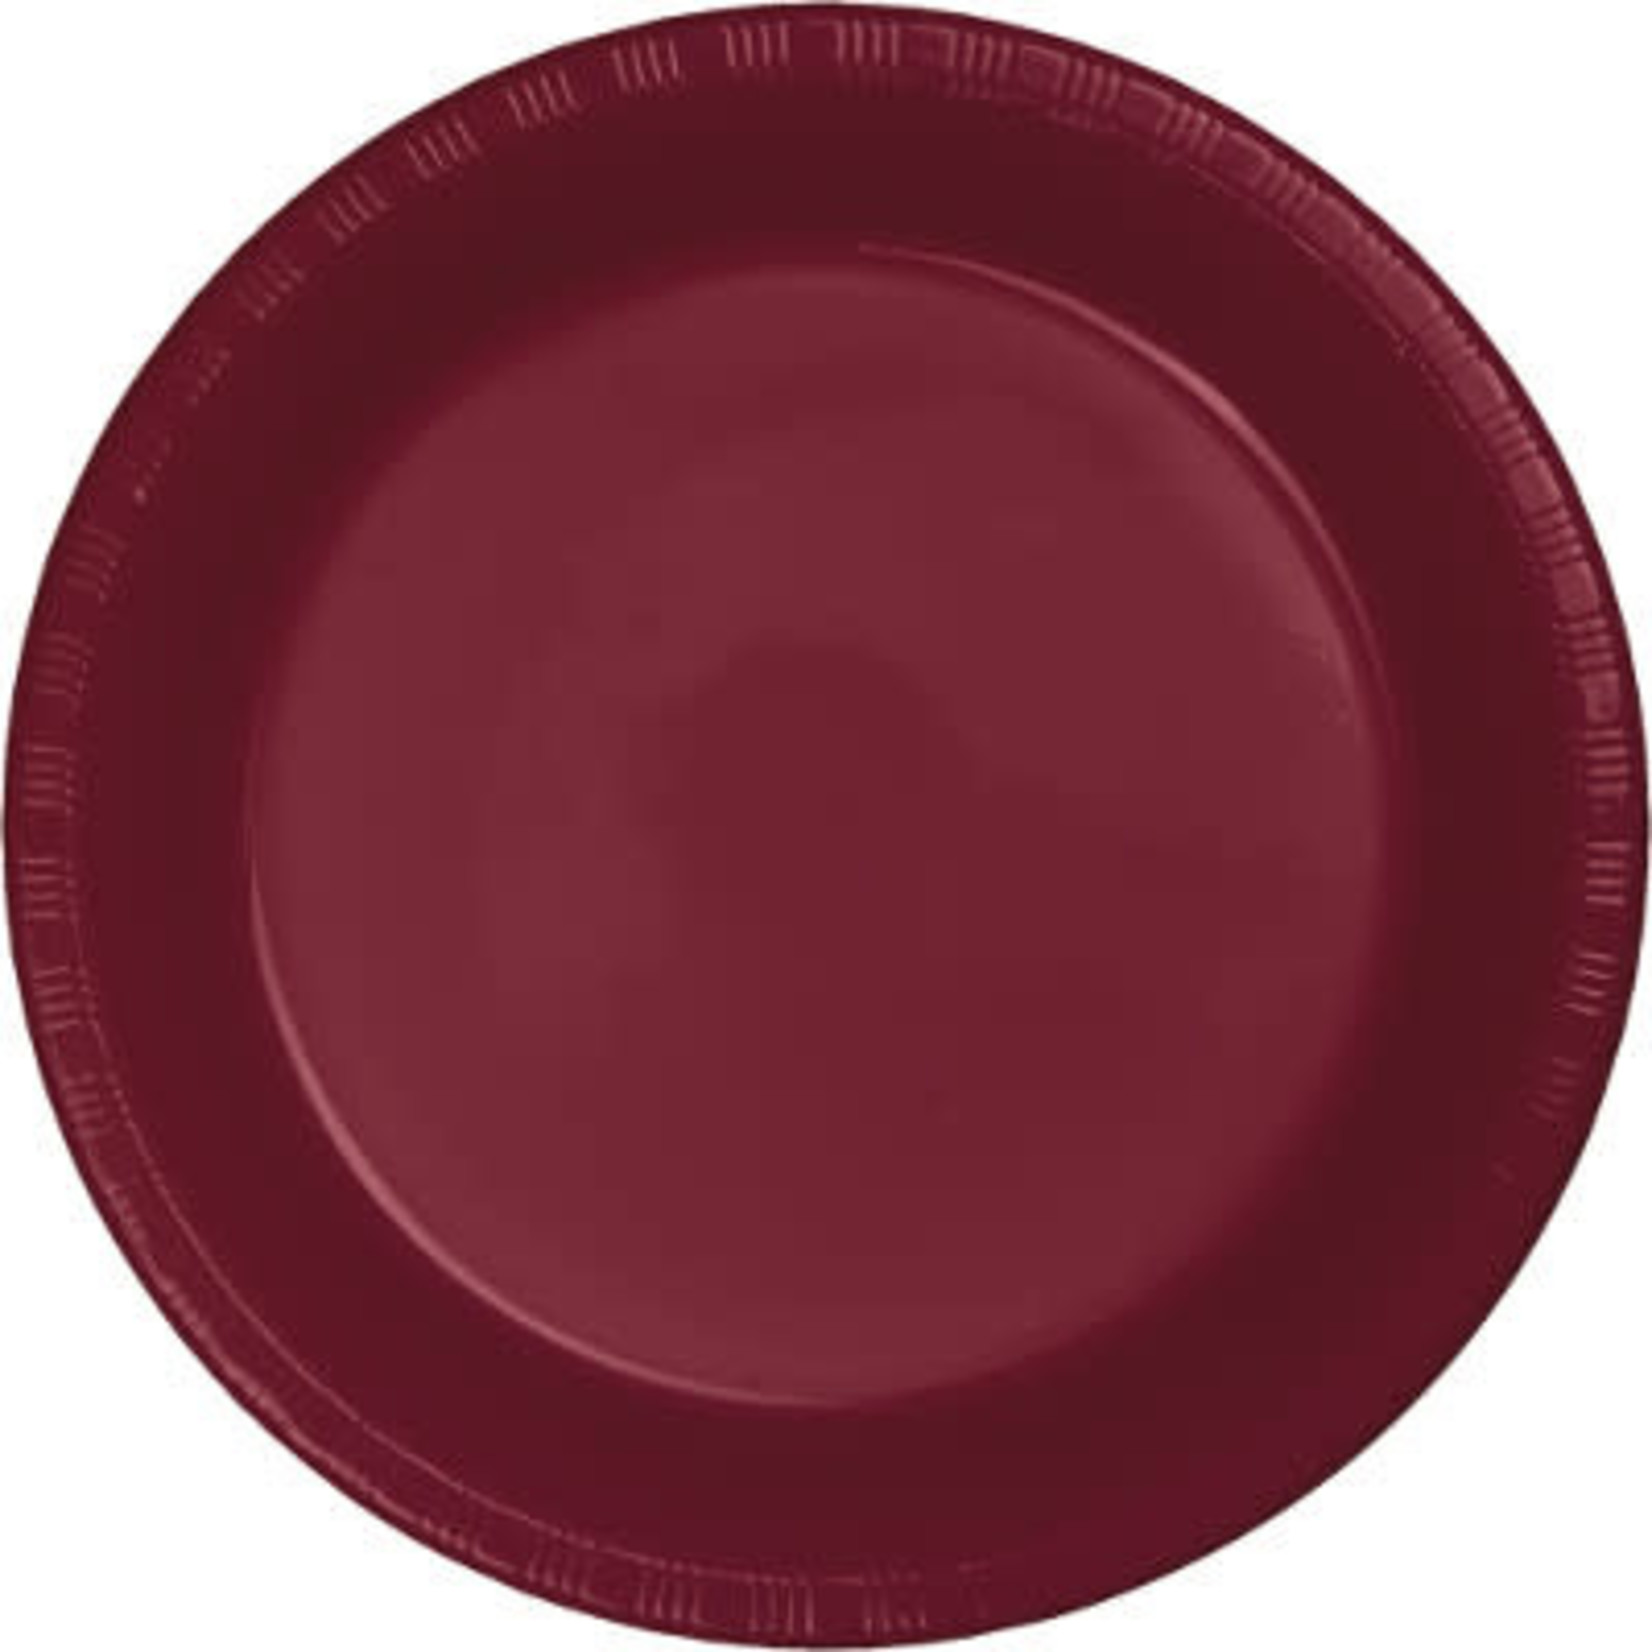 Touch of Color 7" Burgundy Paper Plates - 24ct.